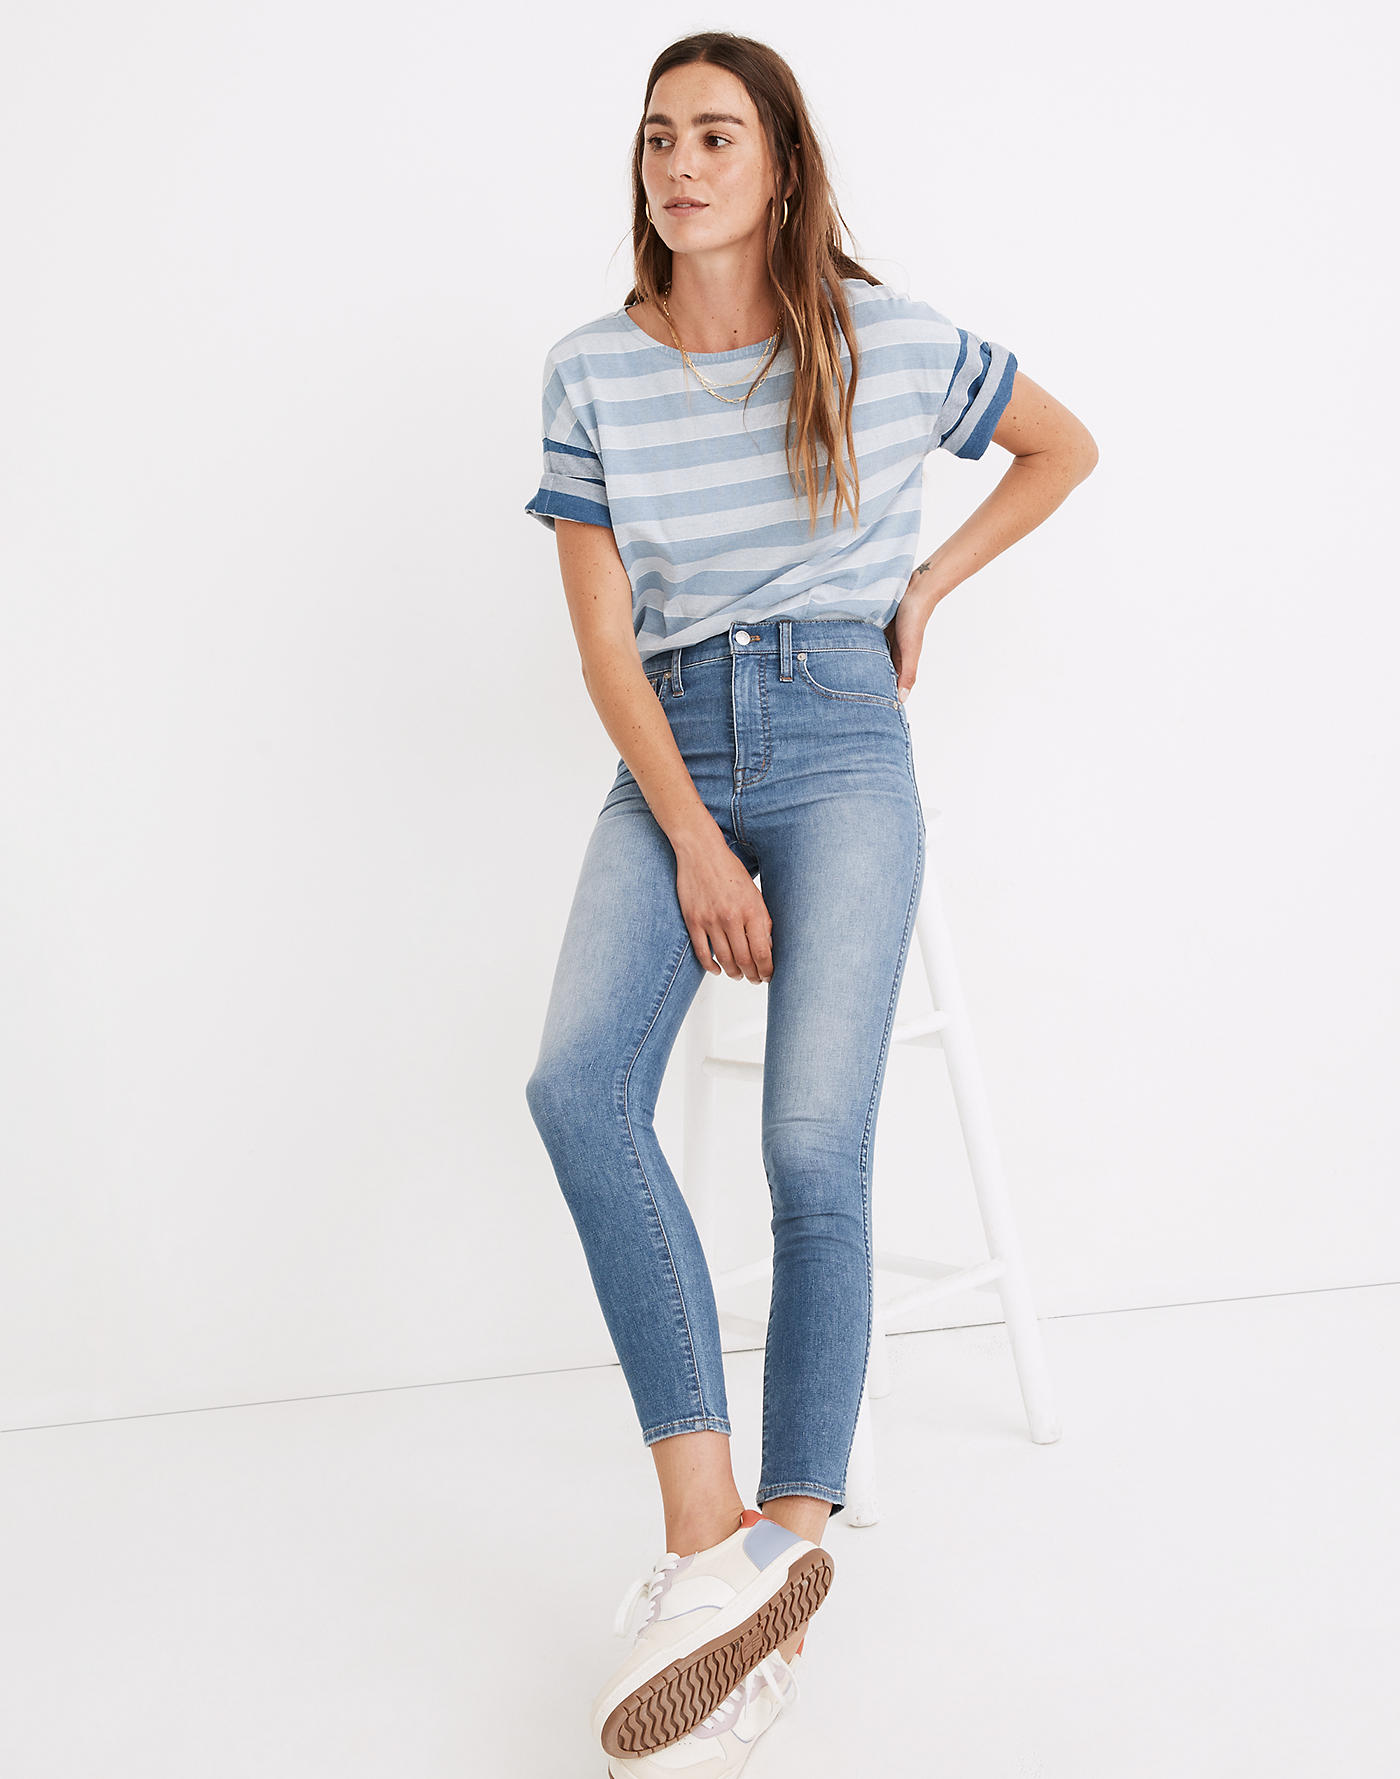 Madewell 10 High-Rise Skinny Crop Jeans in Welling Wash: Summerweight Edition